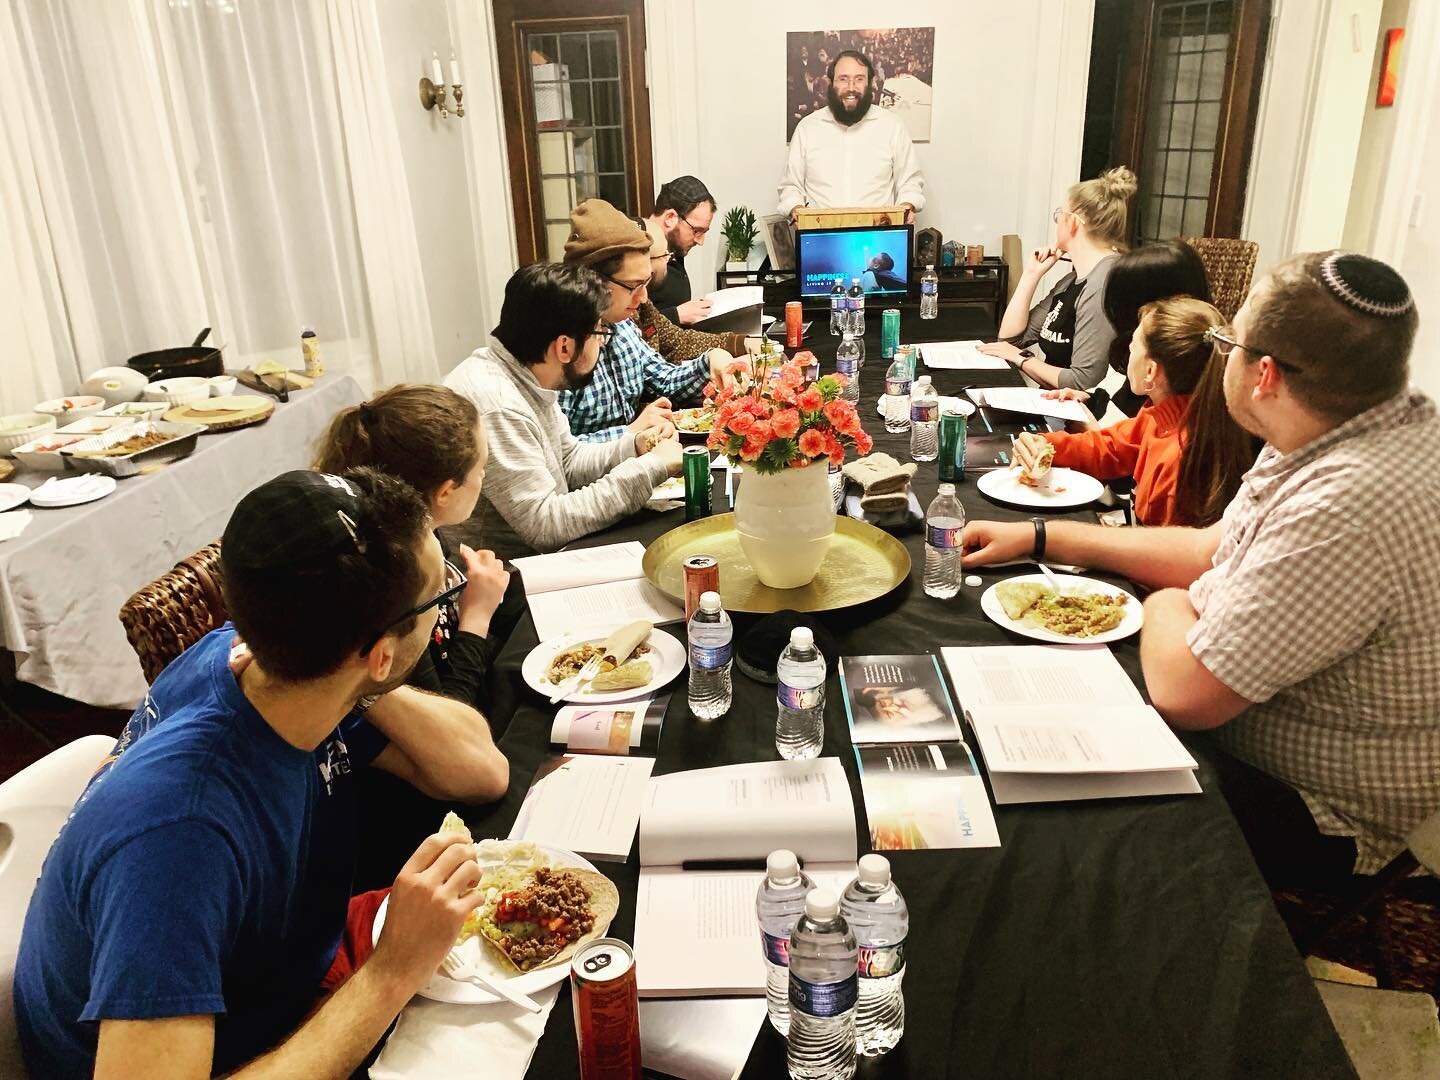 Back to back nights of learning!

Had our first lively class from the CYP Academy on happiness followed by a cozy Torah and Tea! It&rsquo;s never too late to get in on the learning action:) 

Link in bio